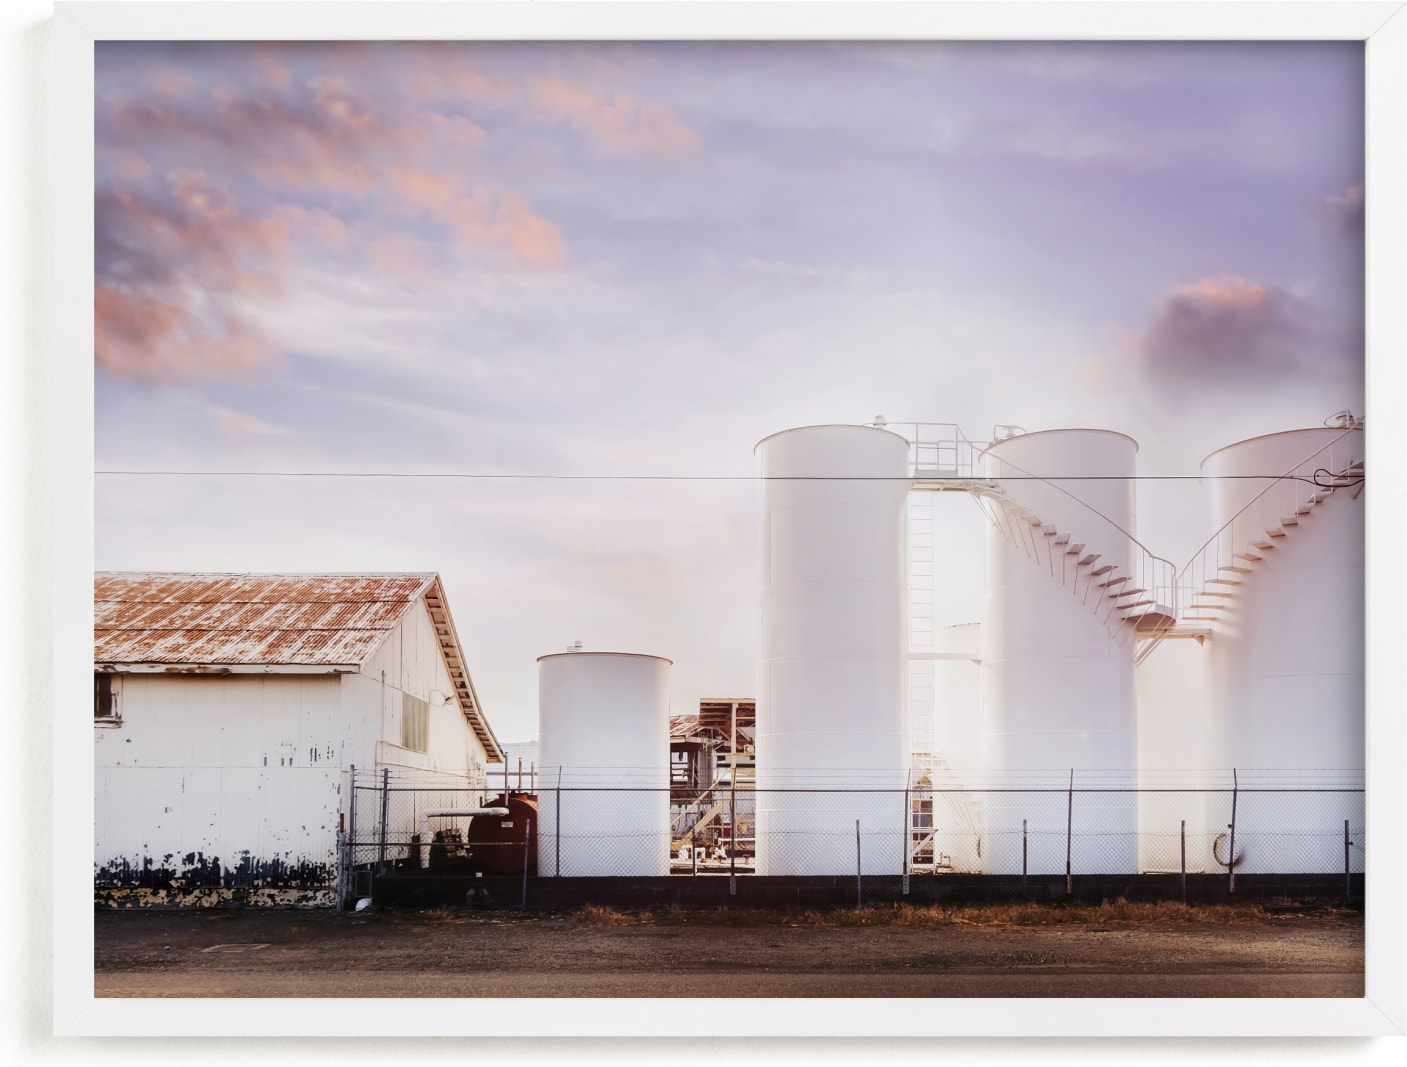 This is a purple art by Hollie Renner Photography called Morning at the Silos.